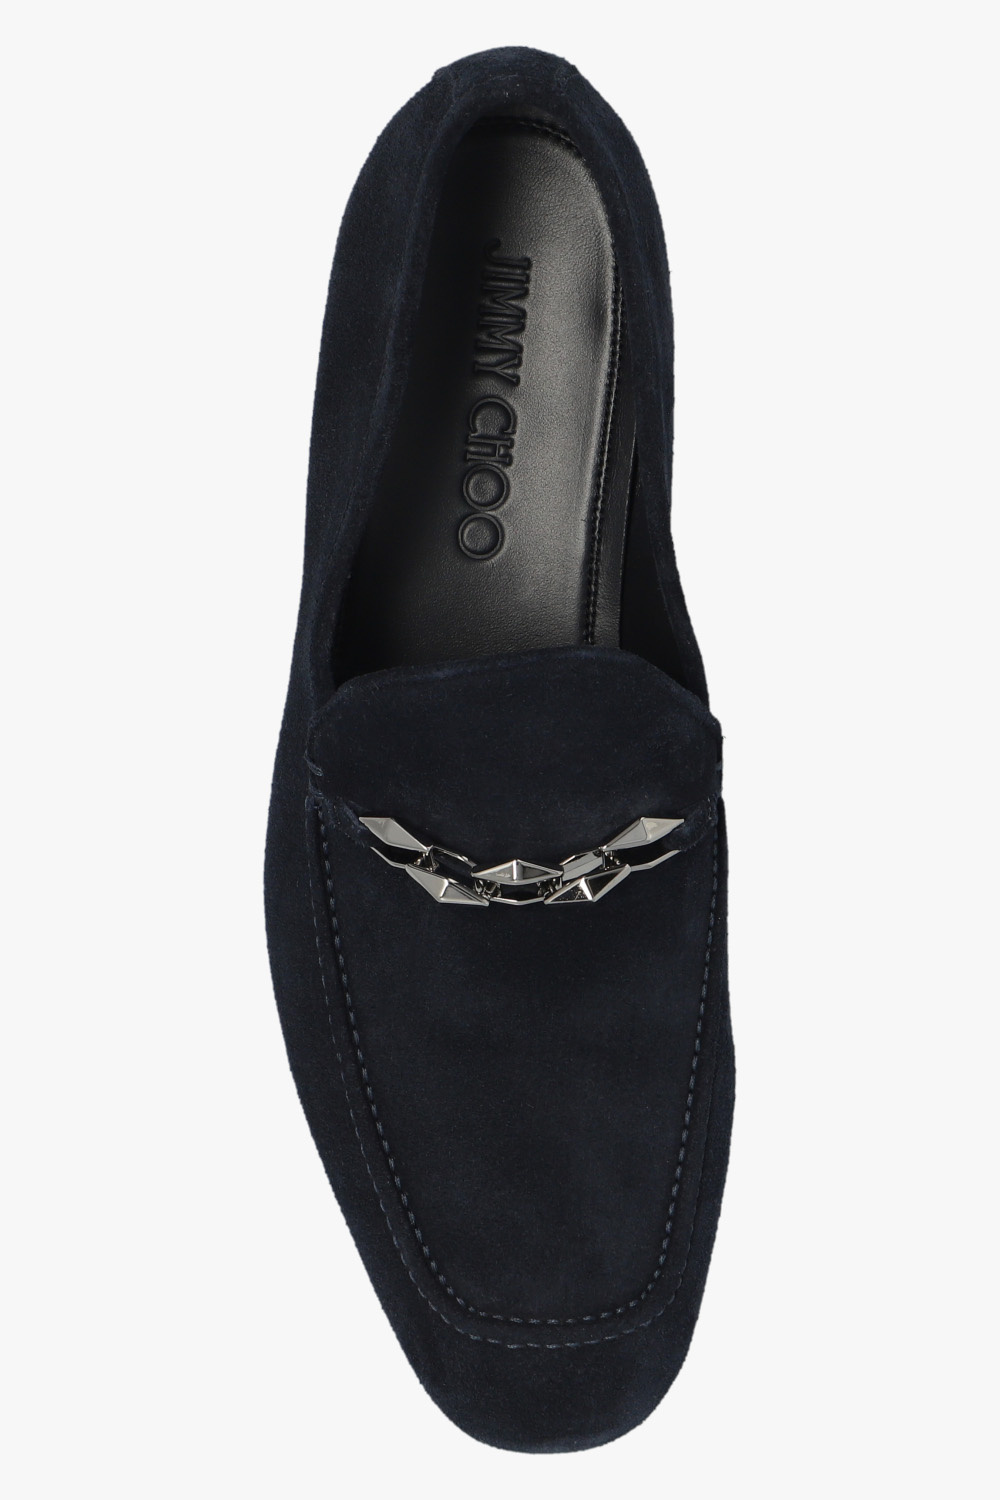 Jimmy Choo ‘Marti’ suede loafers